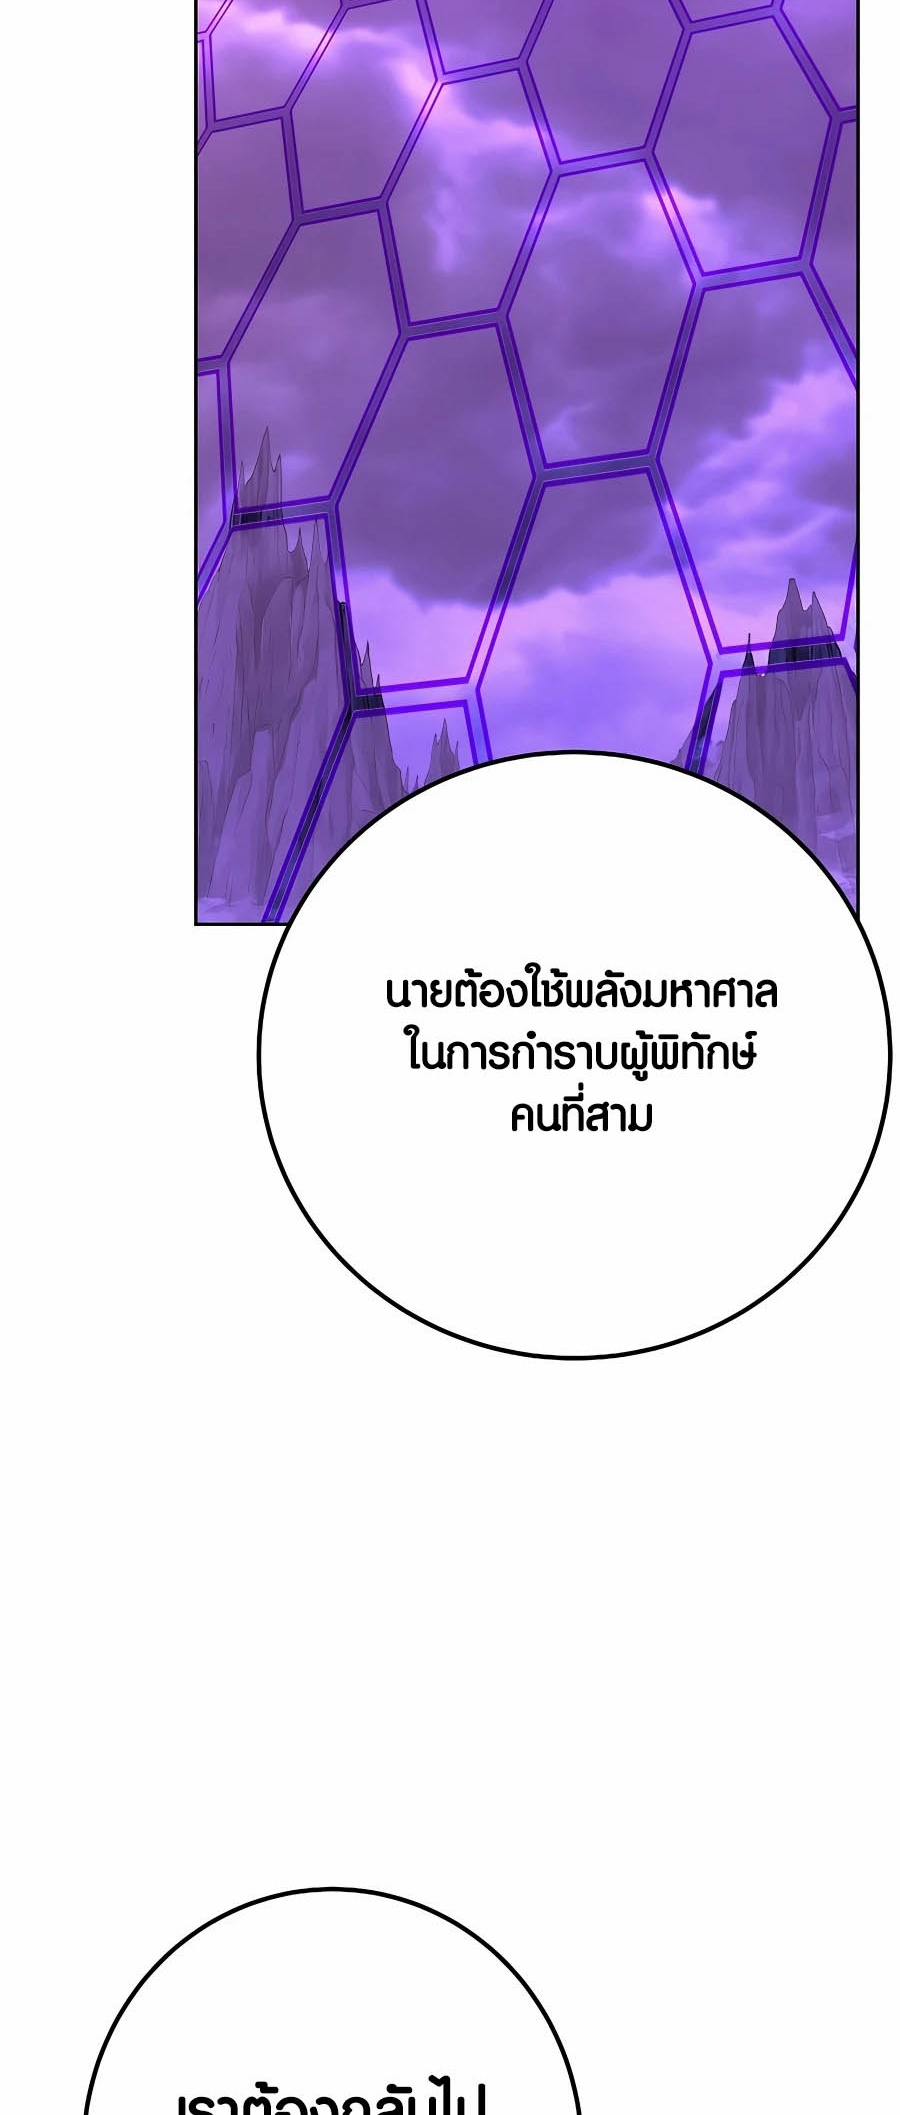 à¸­à¹ˆà¸²à¸™à¸¡à¸±à¸™à¸®à¸§à¸² à¹€à¸£à¸·à¹ˆà¸­à¸‡ The Part Time Land of the Gods 55 63